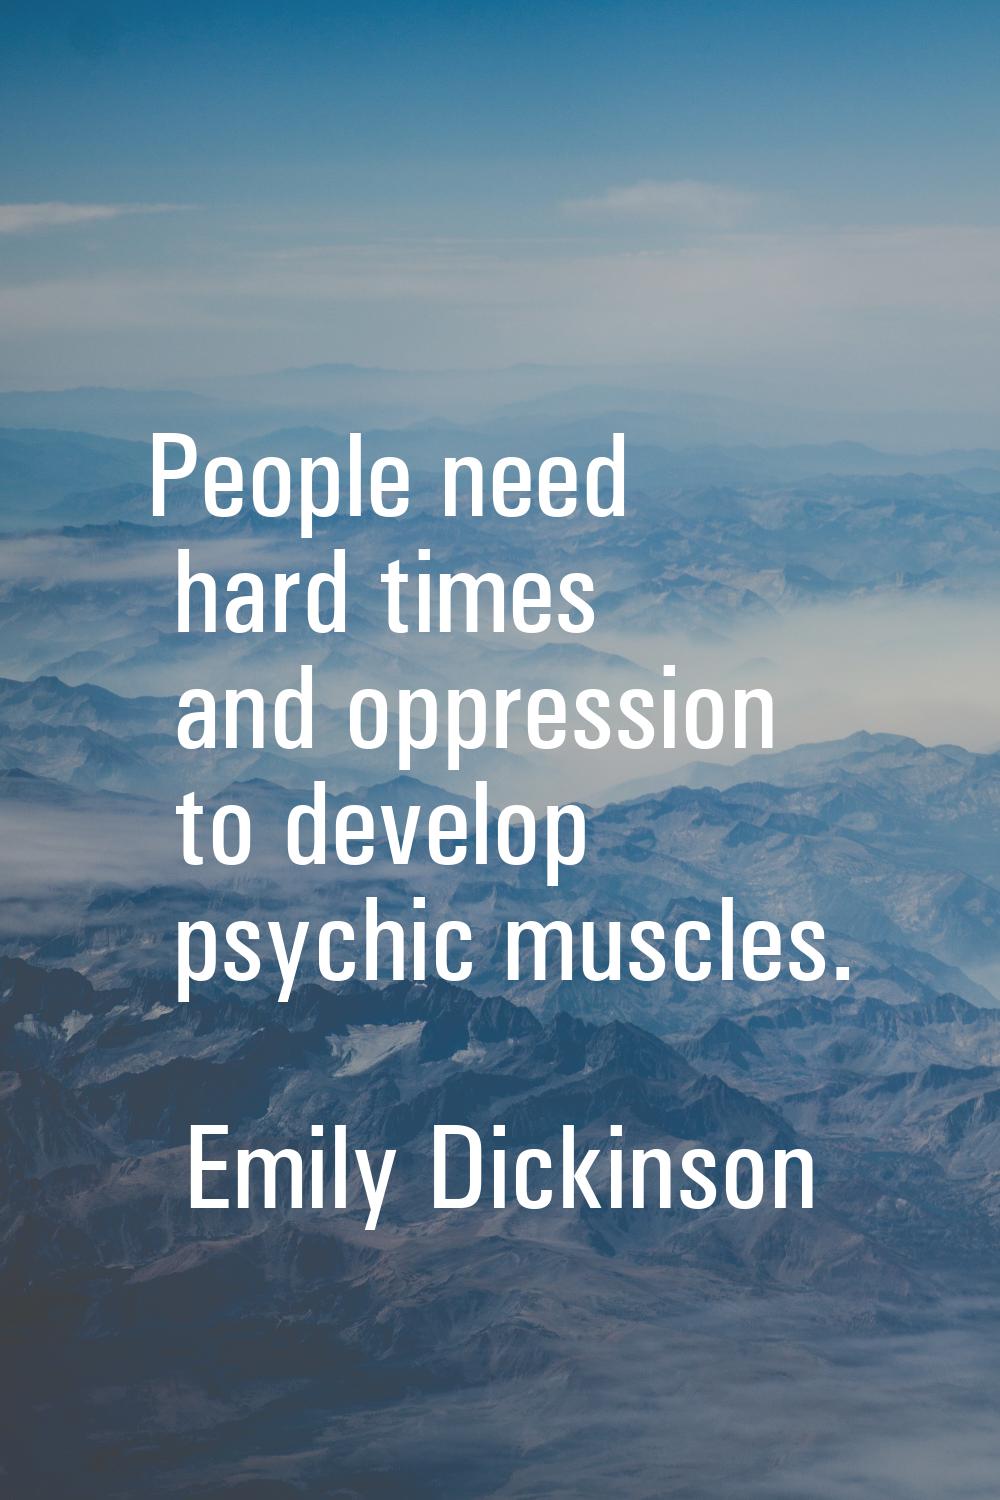 People need hard times and oppression to develop psychic muscles.